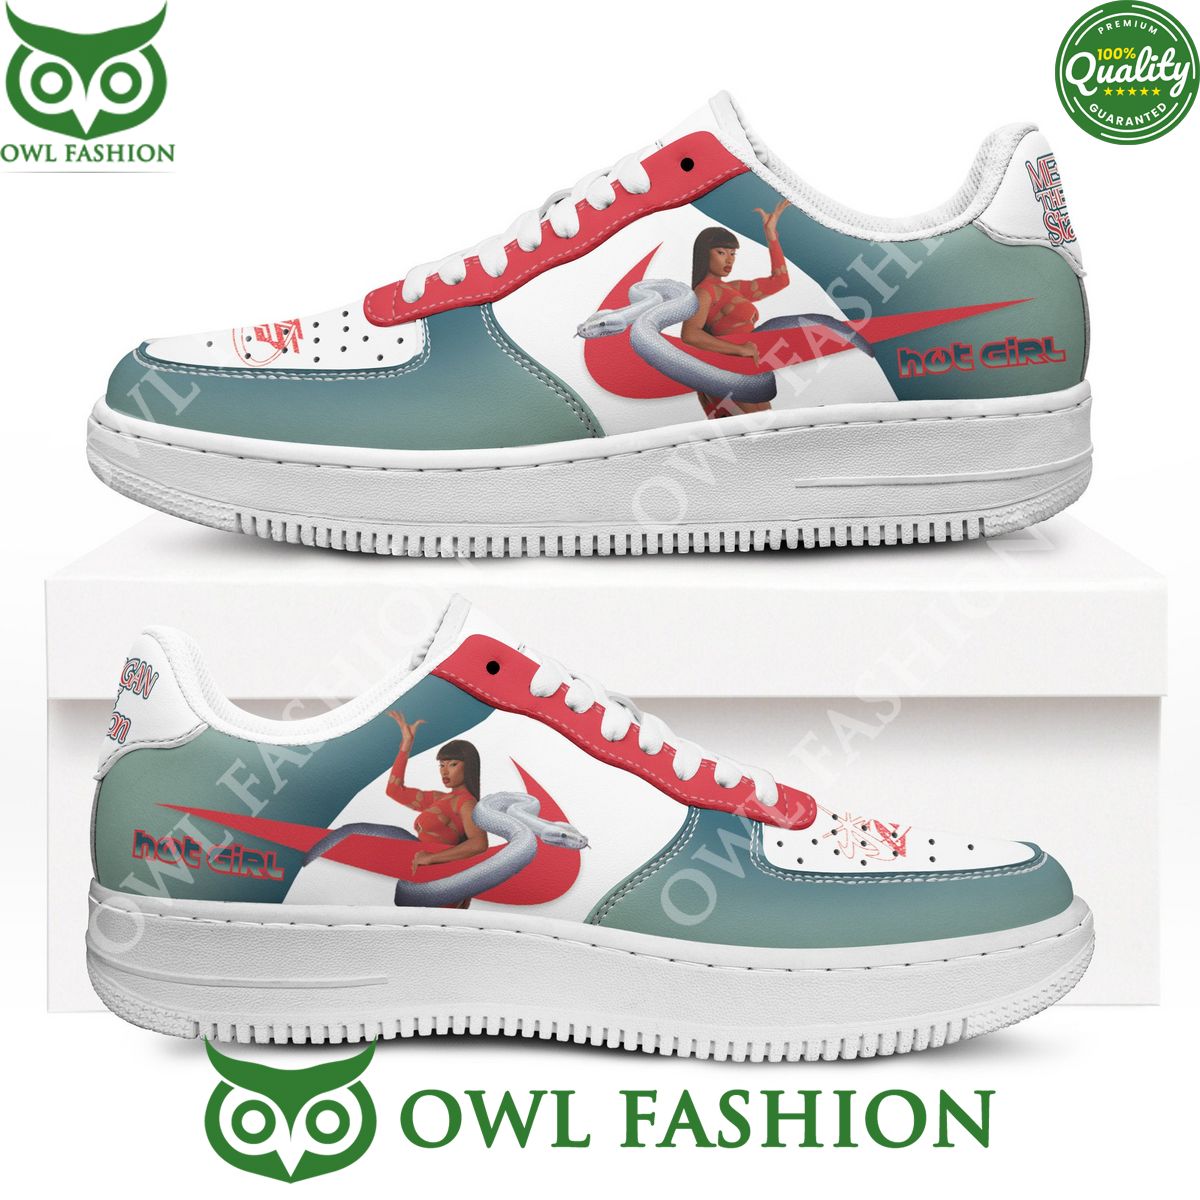 megan thee stalion american rapper hot girl pink naf shoes air force 1 PnOIo.jpg